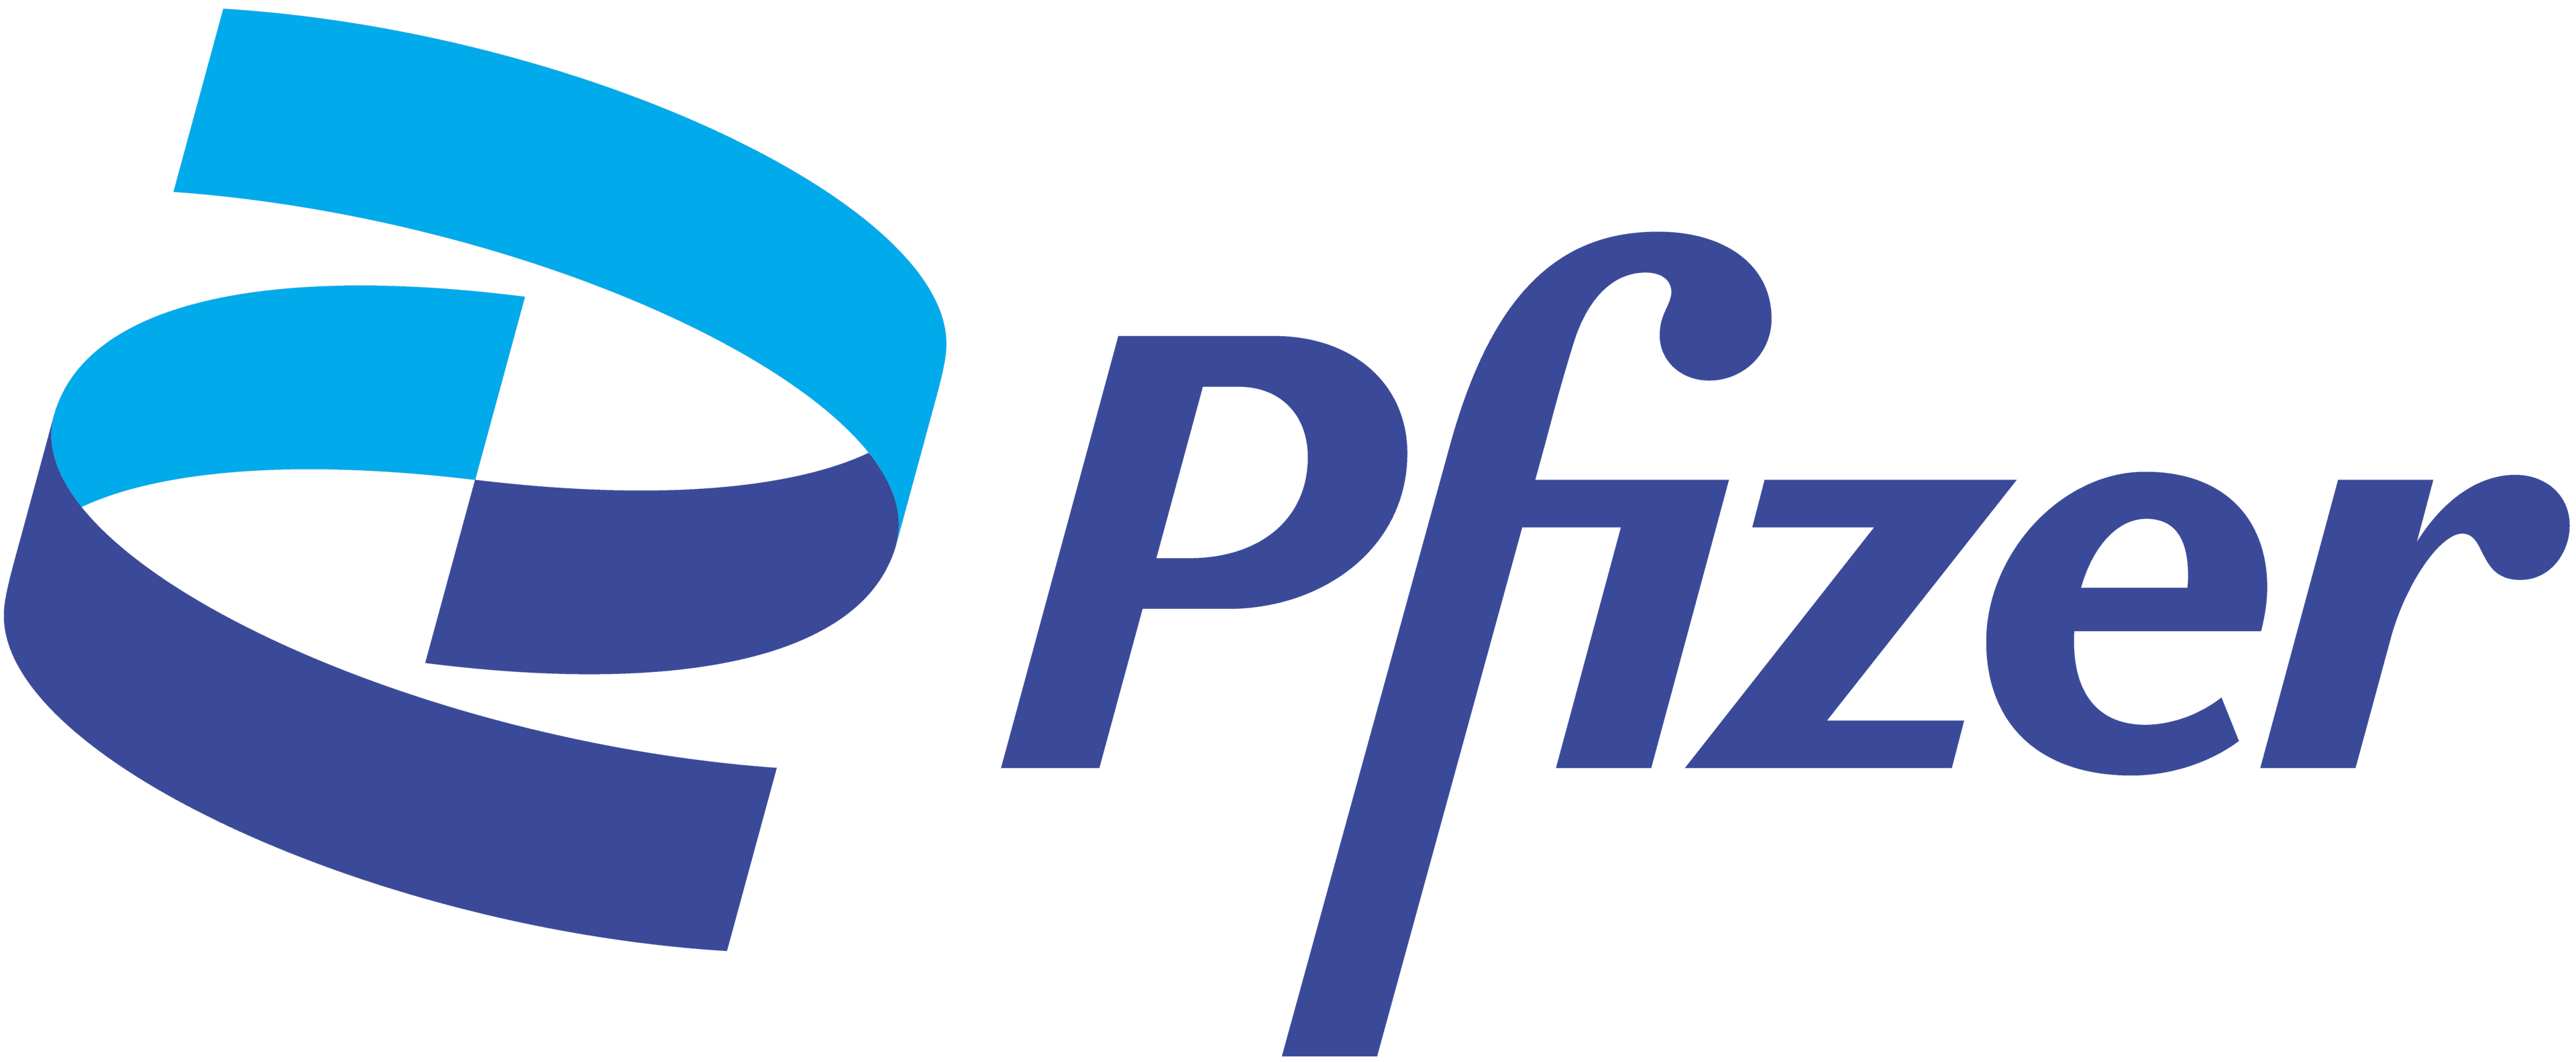 This is the pfizer company brand logo.